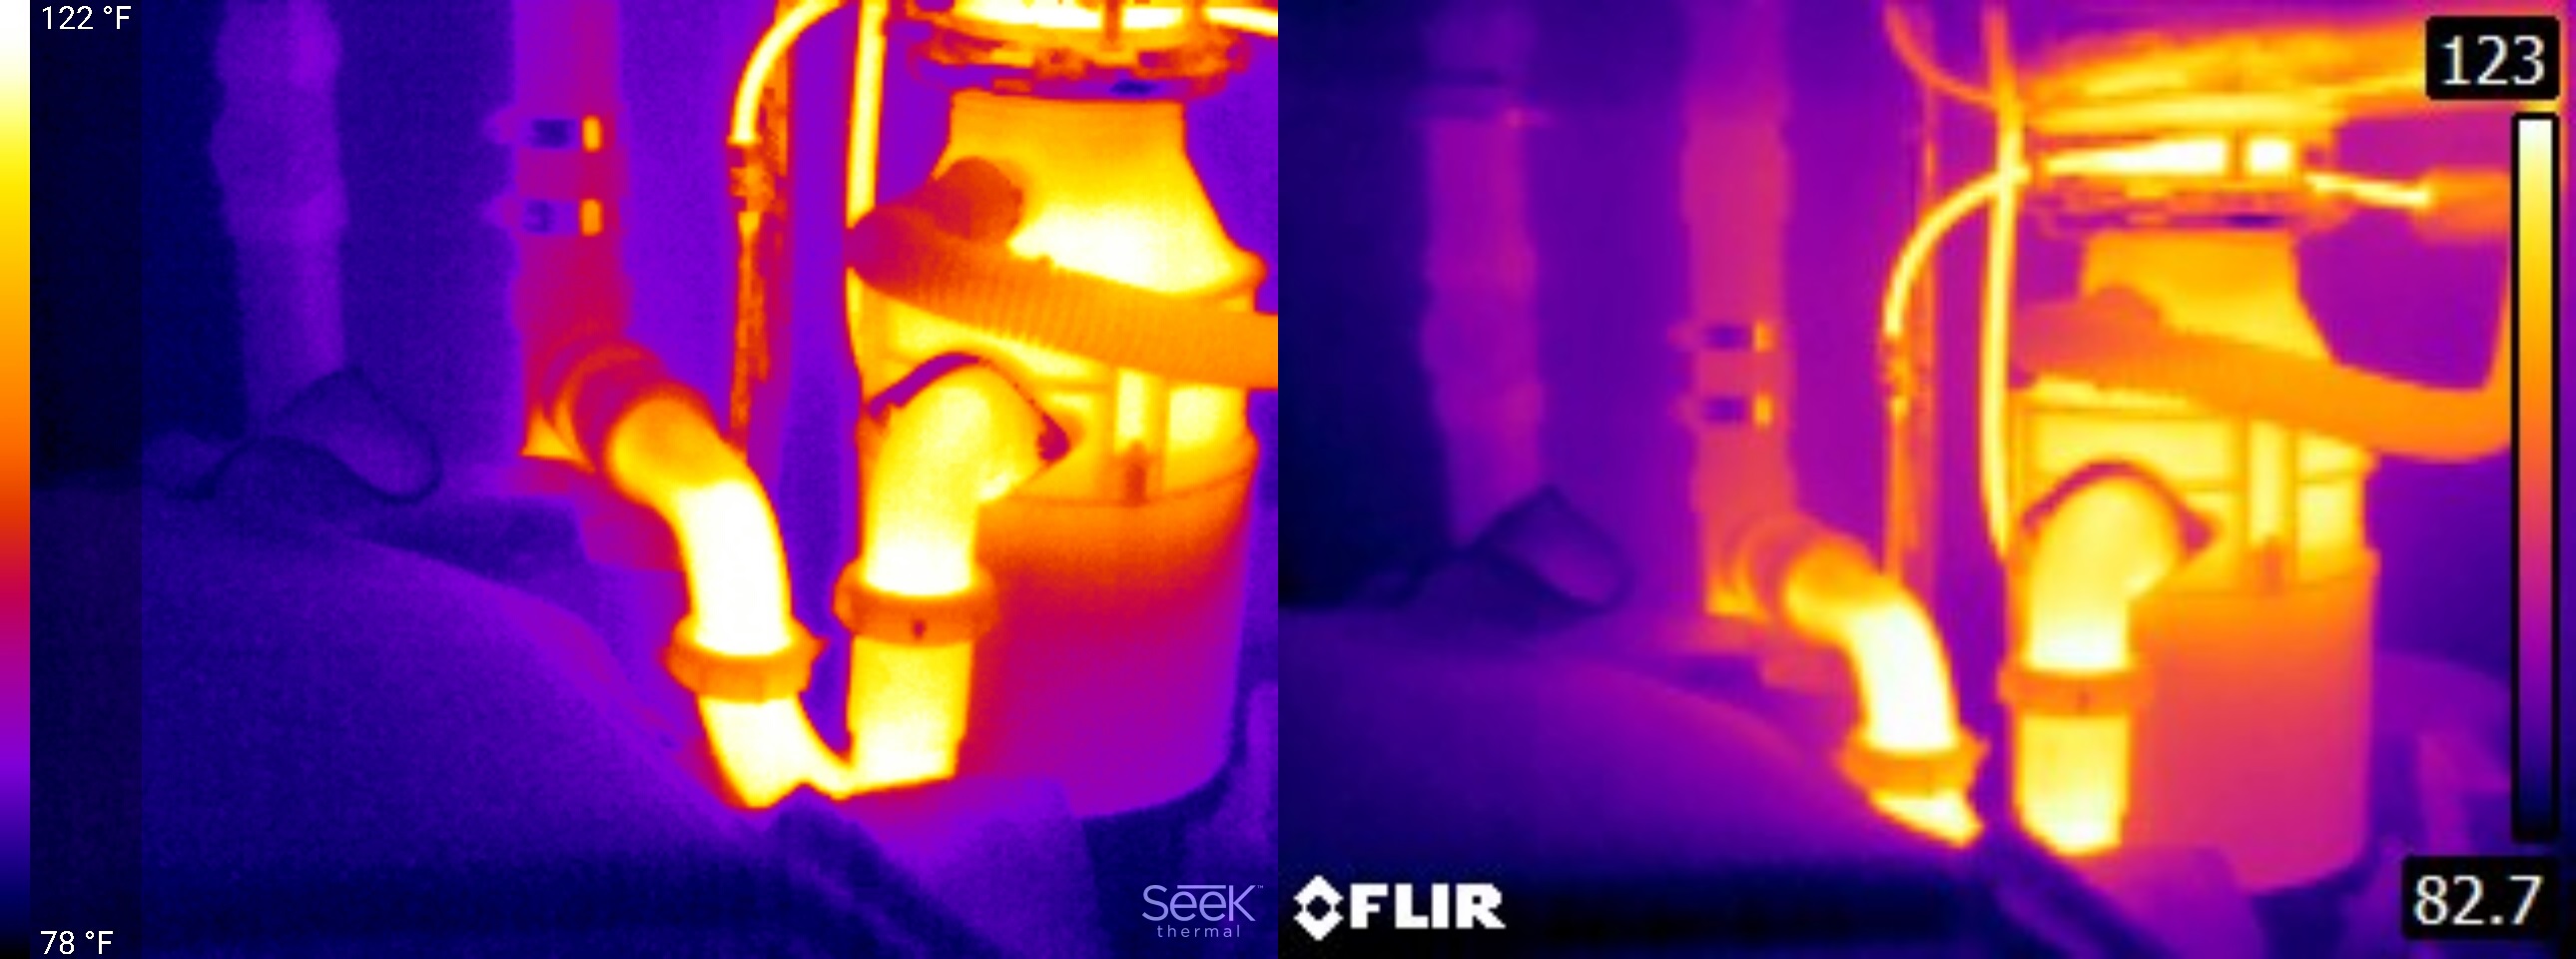 Political make it flat Engrave Seek Thermal CompactPRO infrared camera: a home inspector's review -  Structure Tech Home Inspections